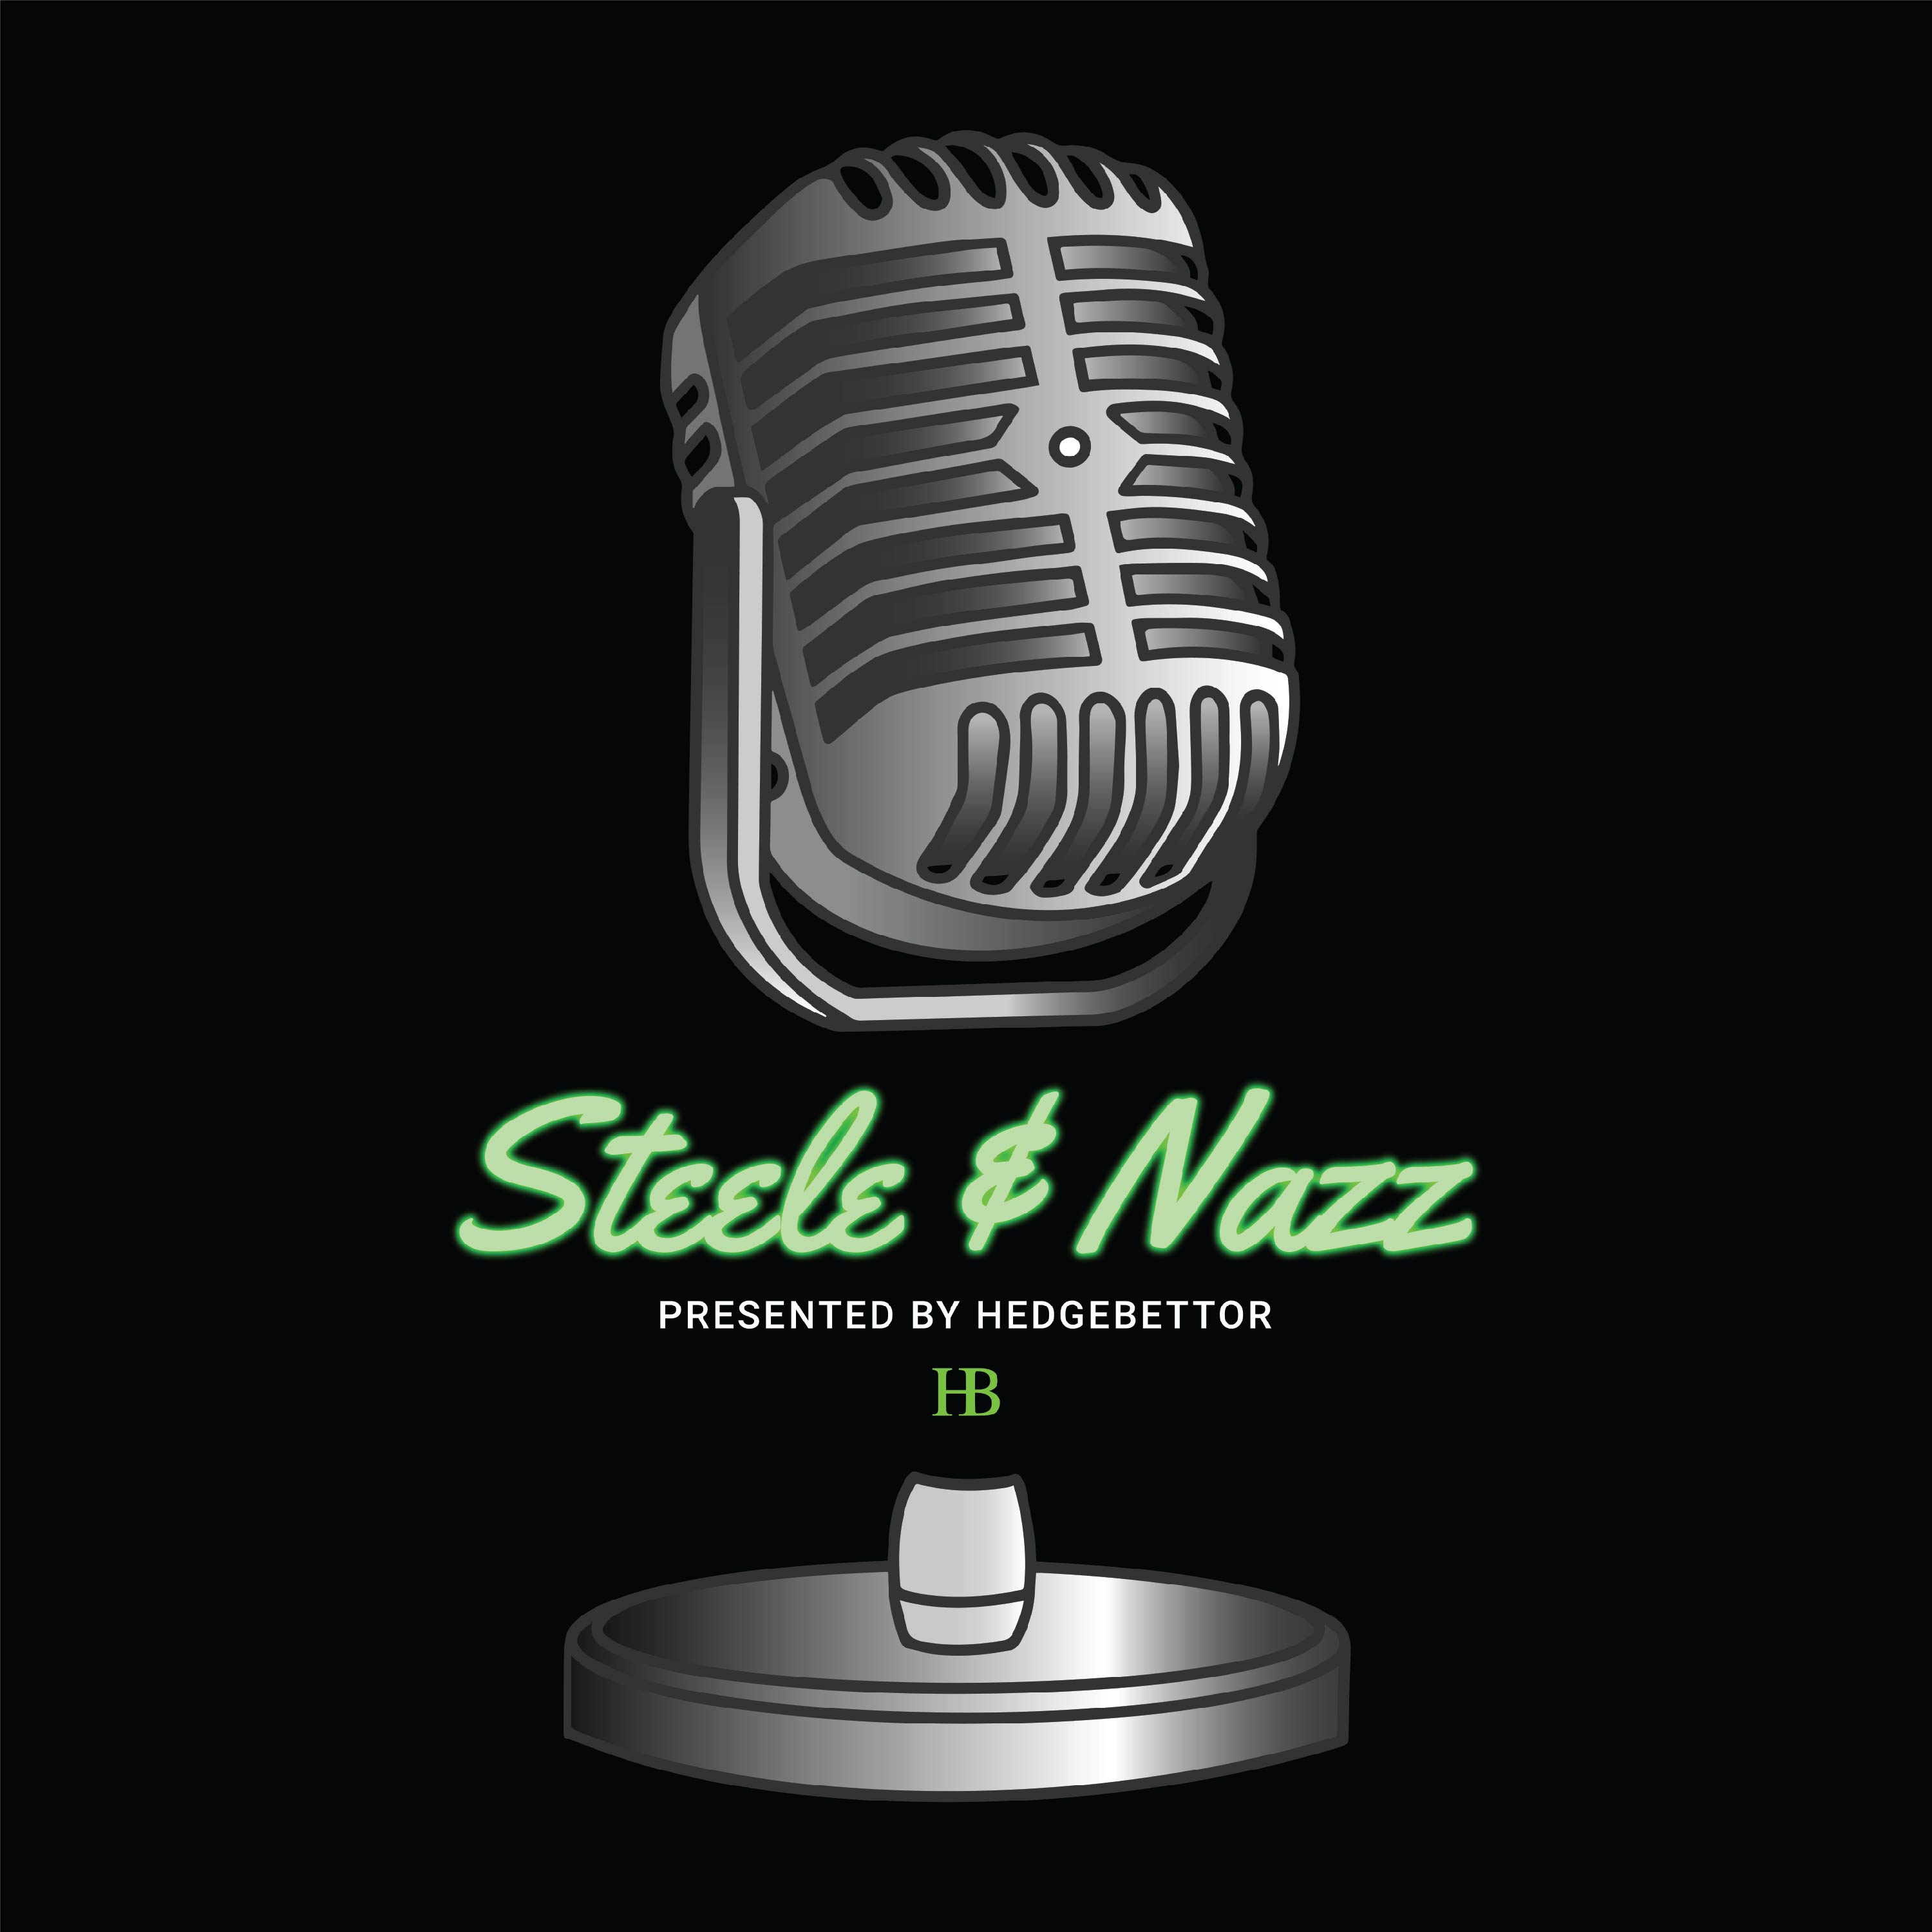 Steele & Nazz - Ep. 34: Featuring Francis Hogan & Mo Chanel